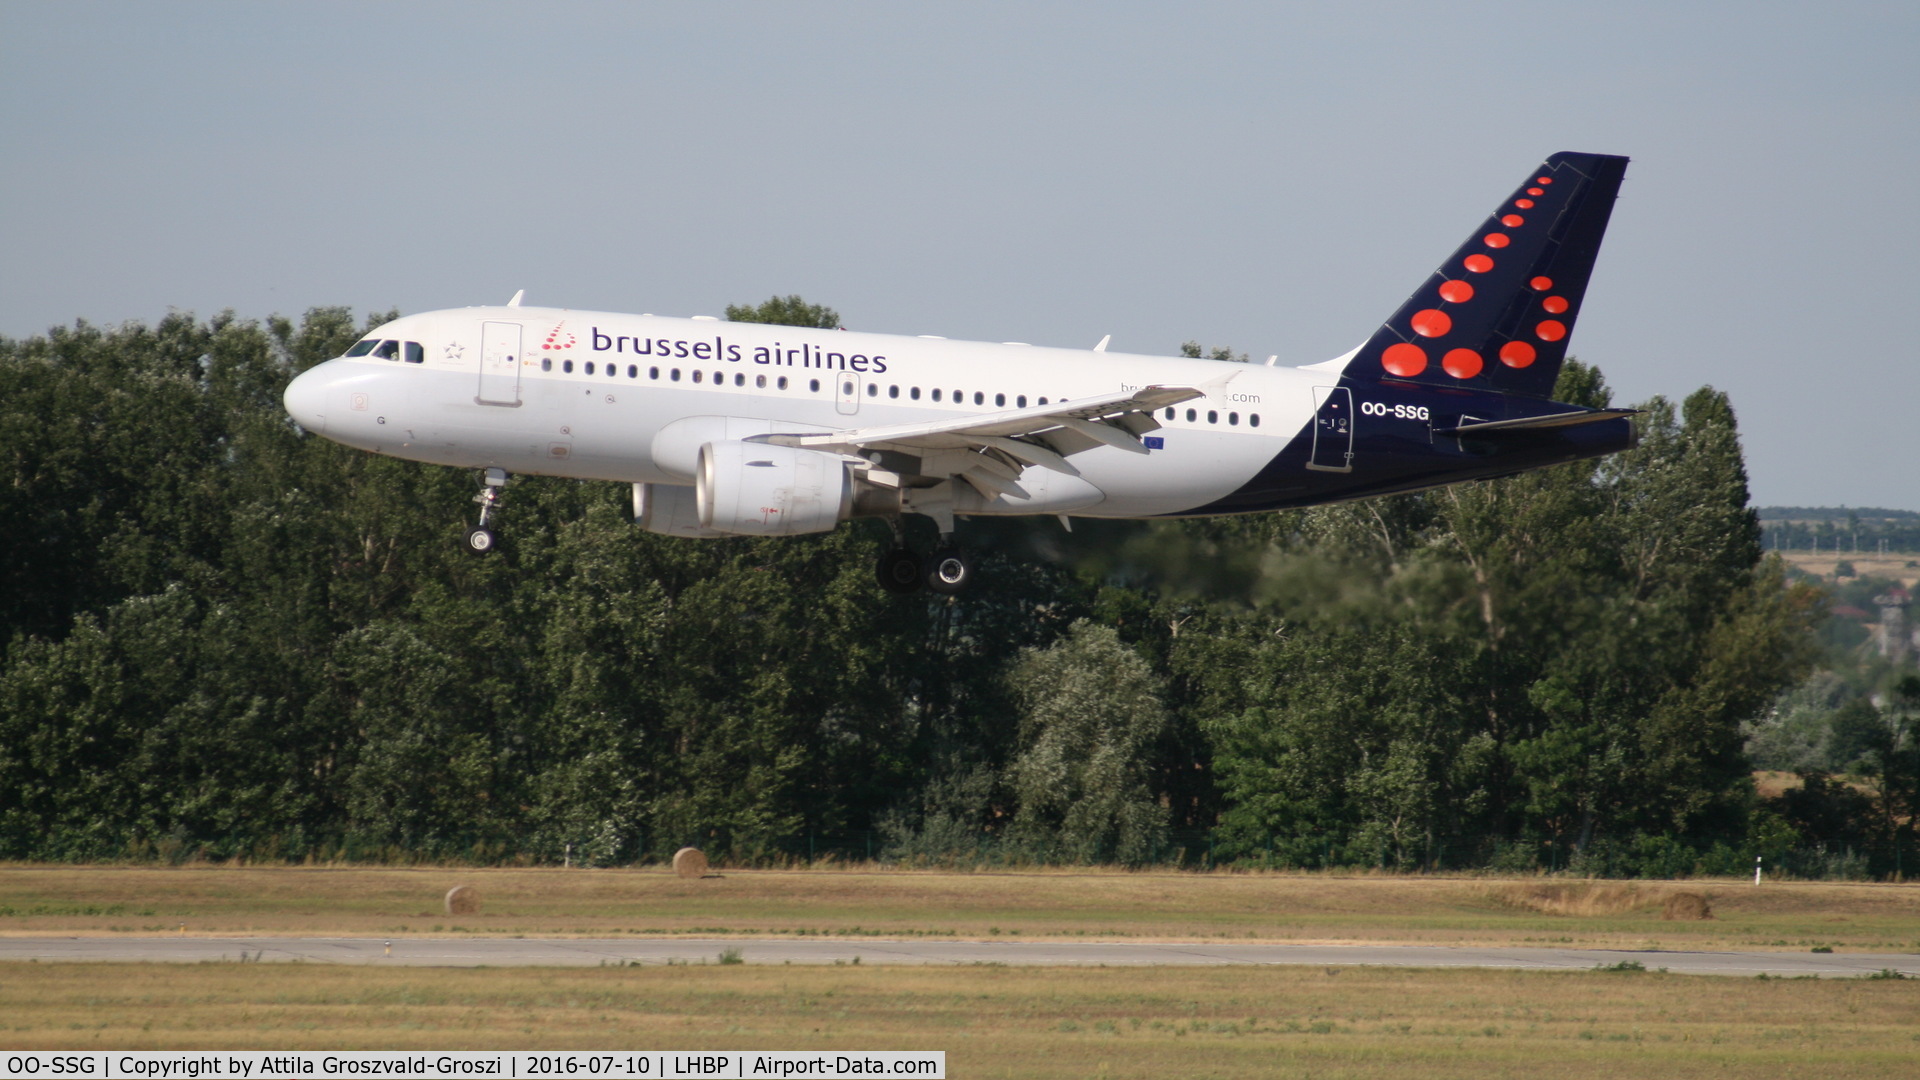 OO-SSG, 2000 Airbus A319-112 C/N 1160, Budapest Airport, Hungary - Landing